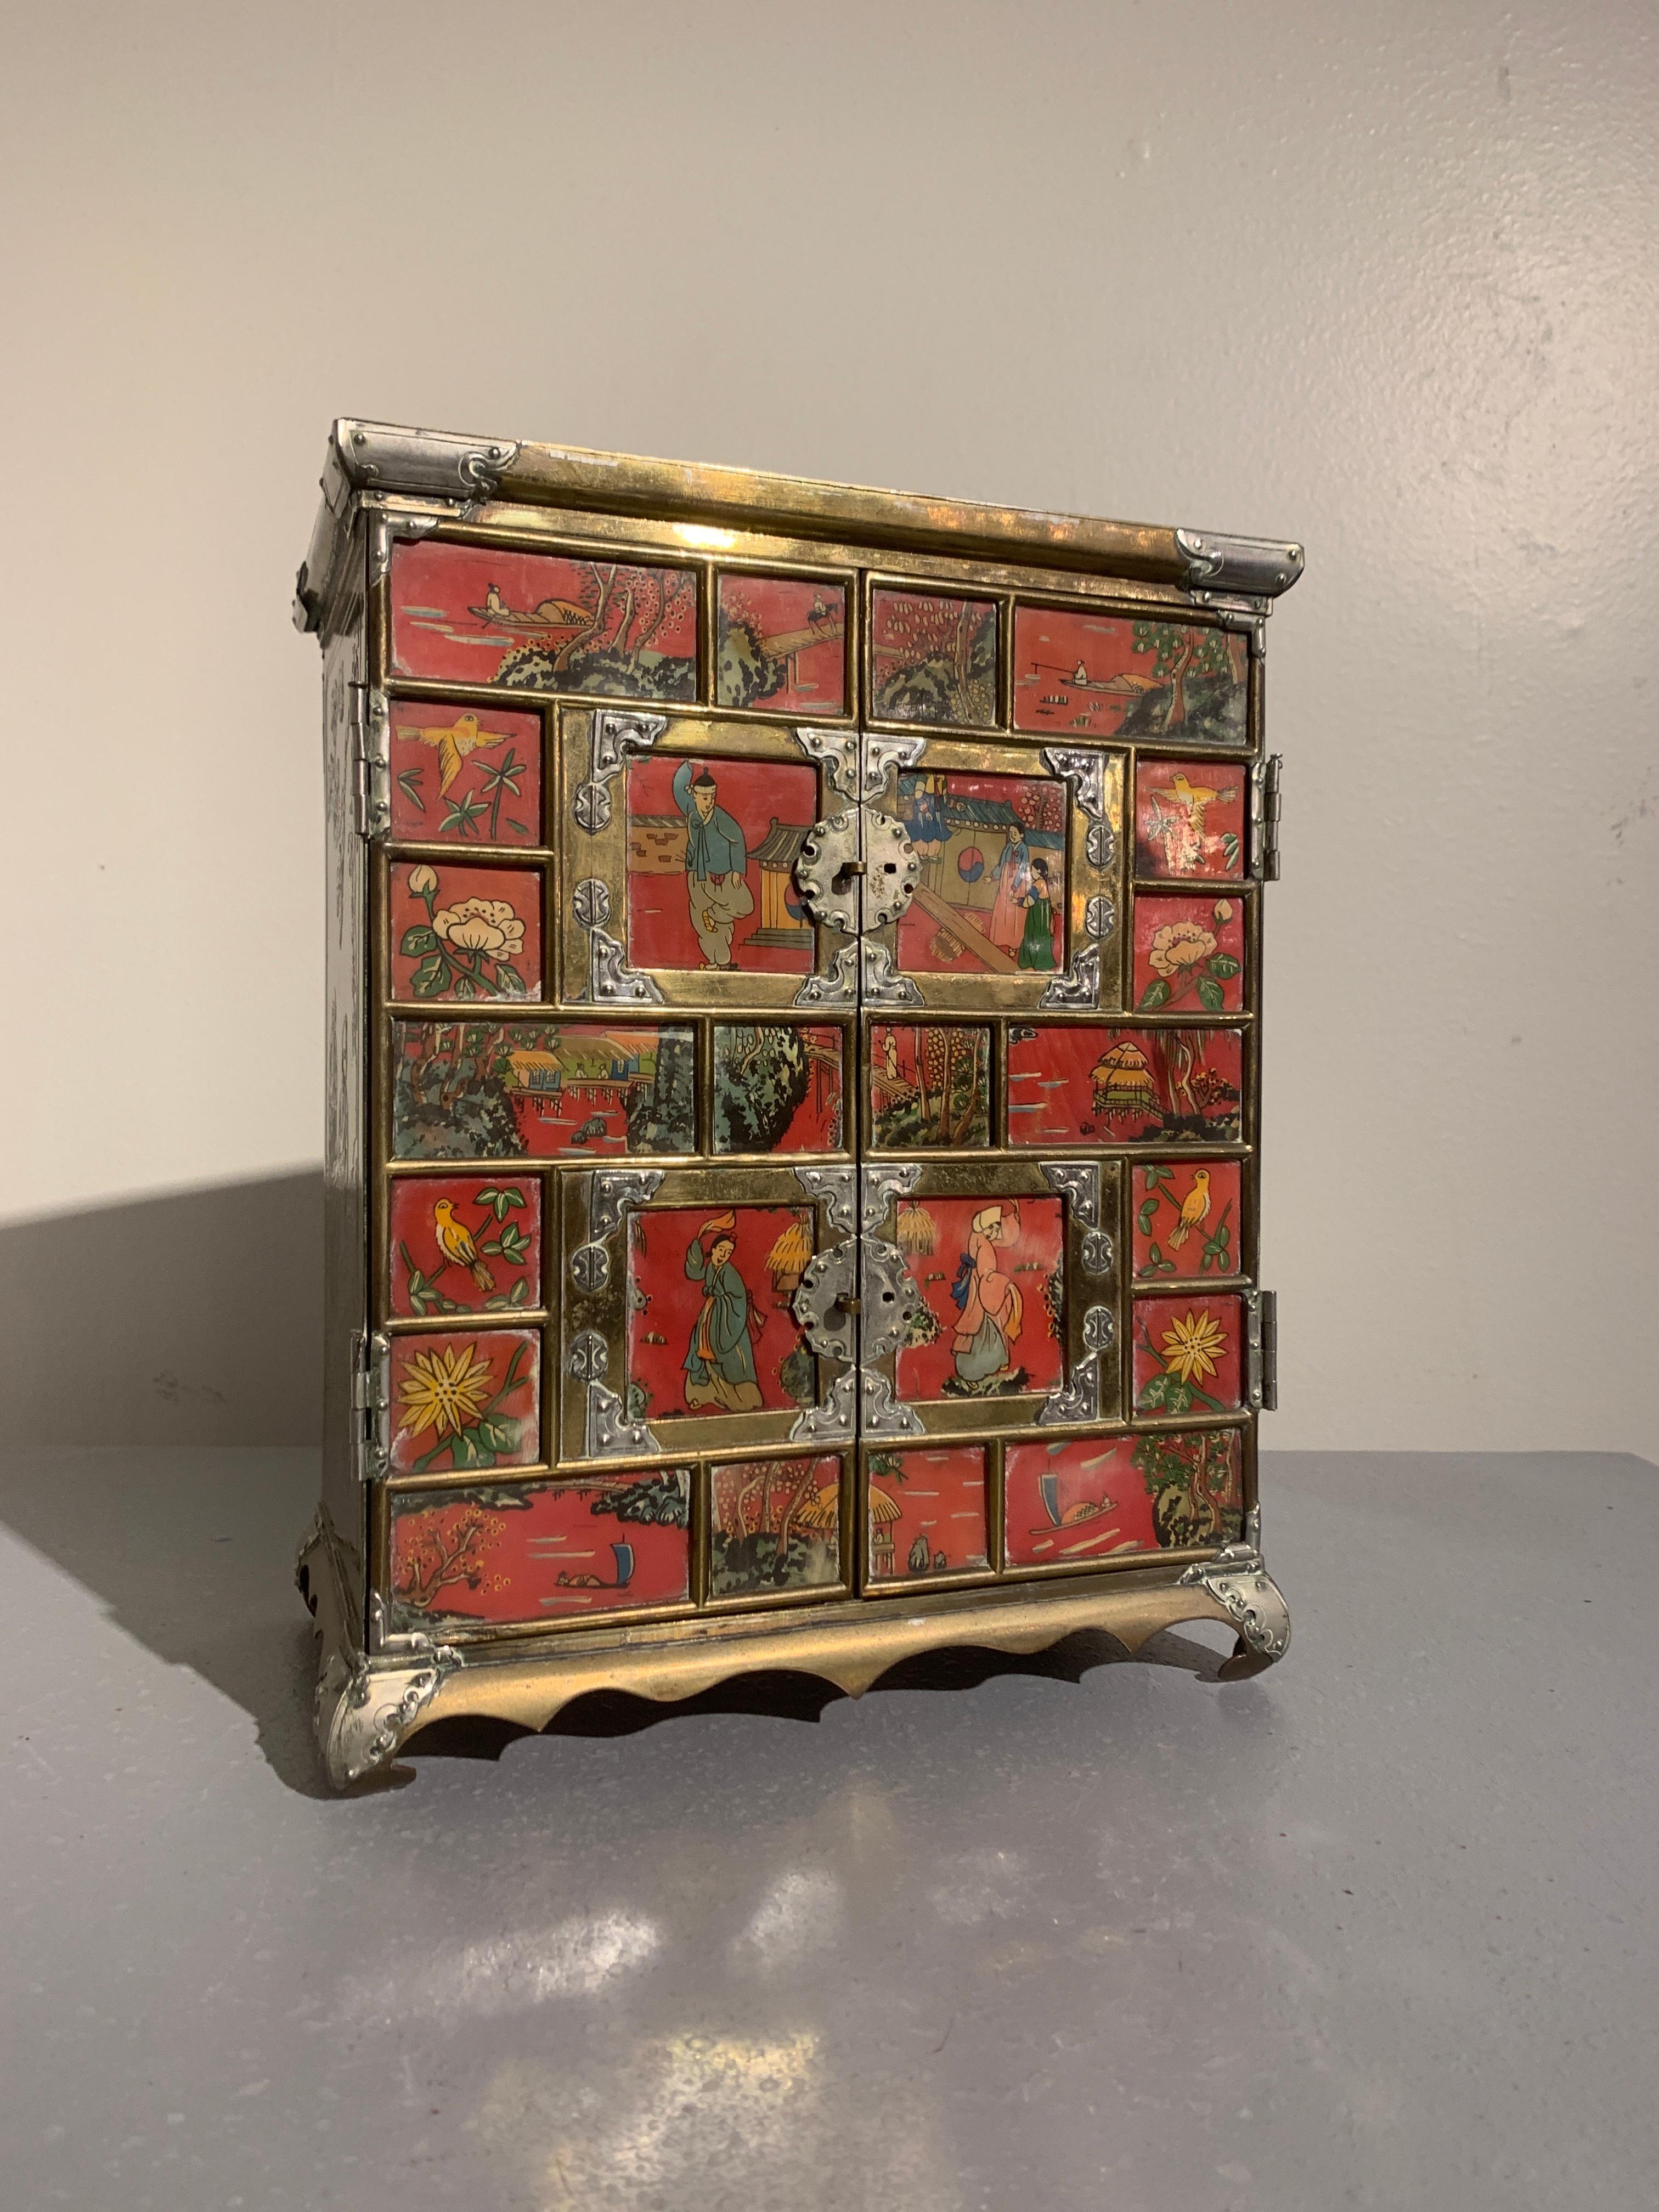 A wonderful vintage Korean brass jewelry cabinet with inset reverse painted ox horn panels, 1940s.

The jewelry chest, or possibly collectors cabinet, is in the shape of a traditional Korean clothing cabinet, with a brass frame and brass fittings.